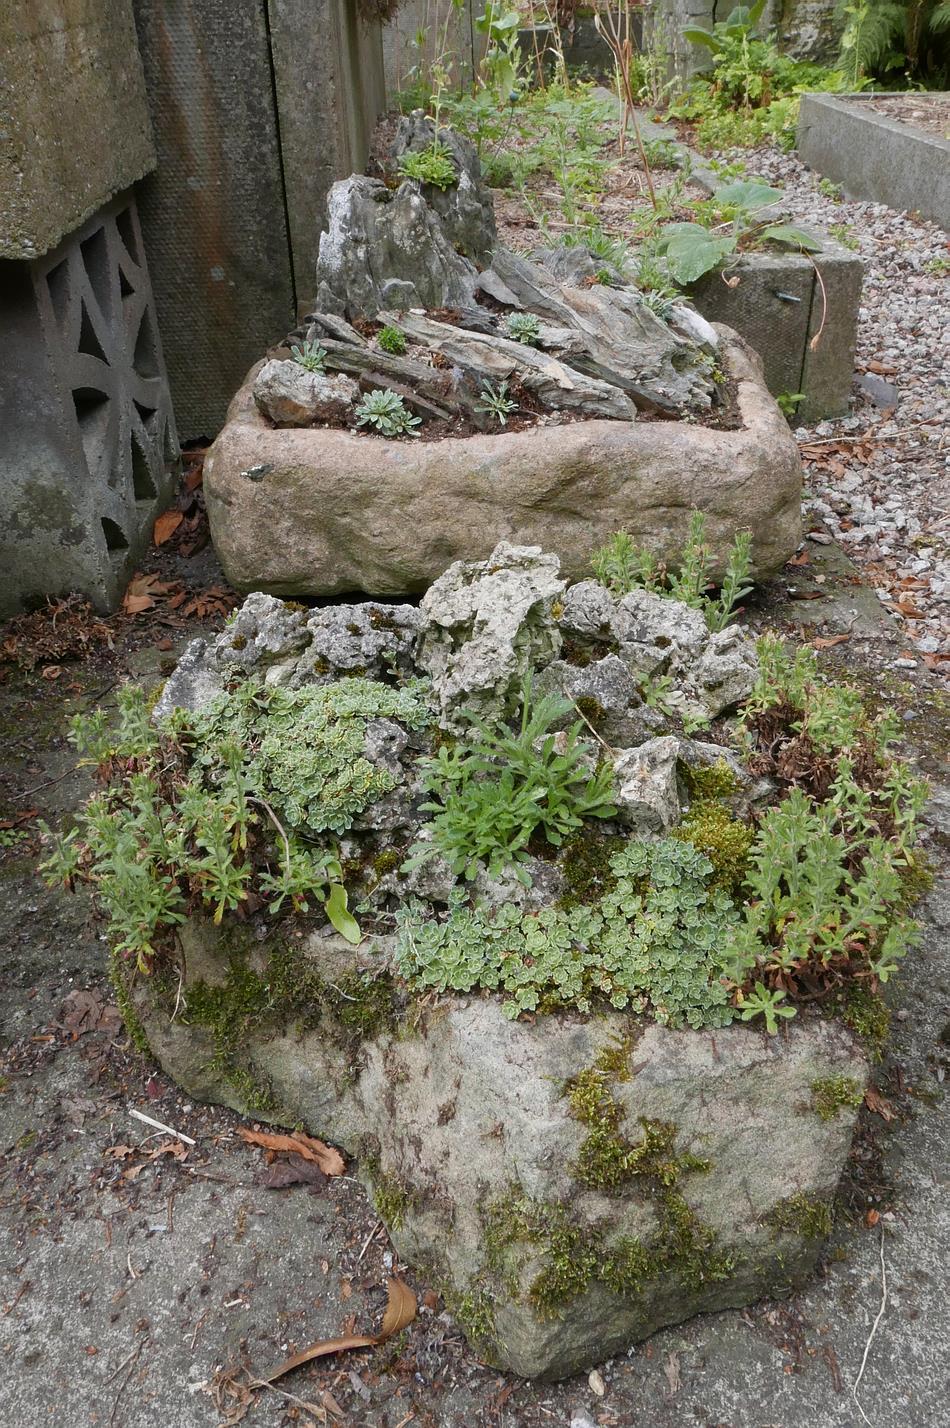 A month ago I removed the mossy saxifrage to reveal the rock and